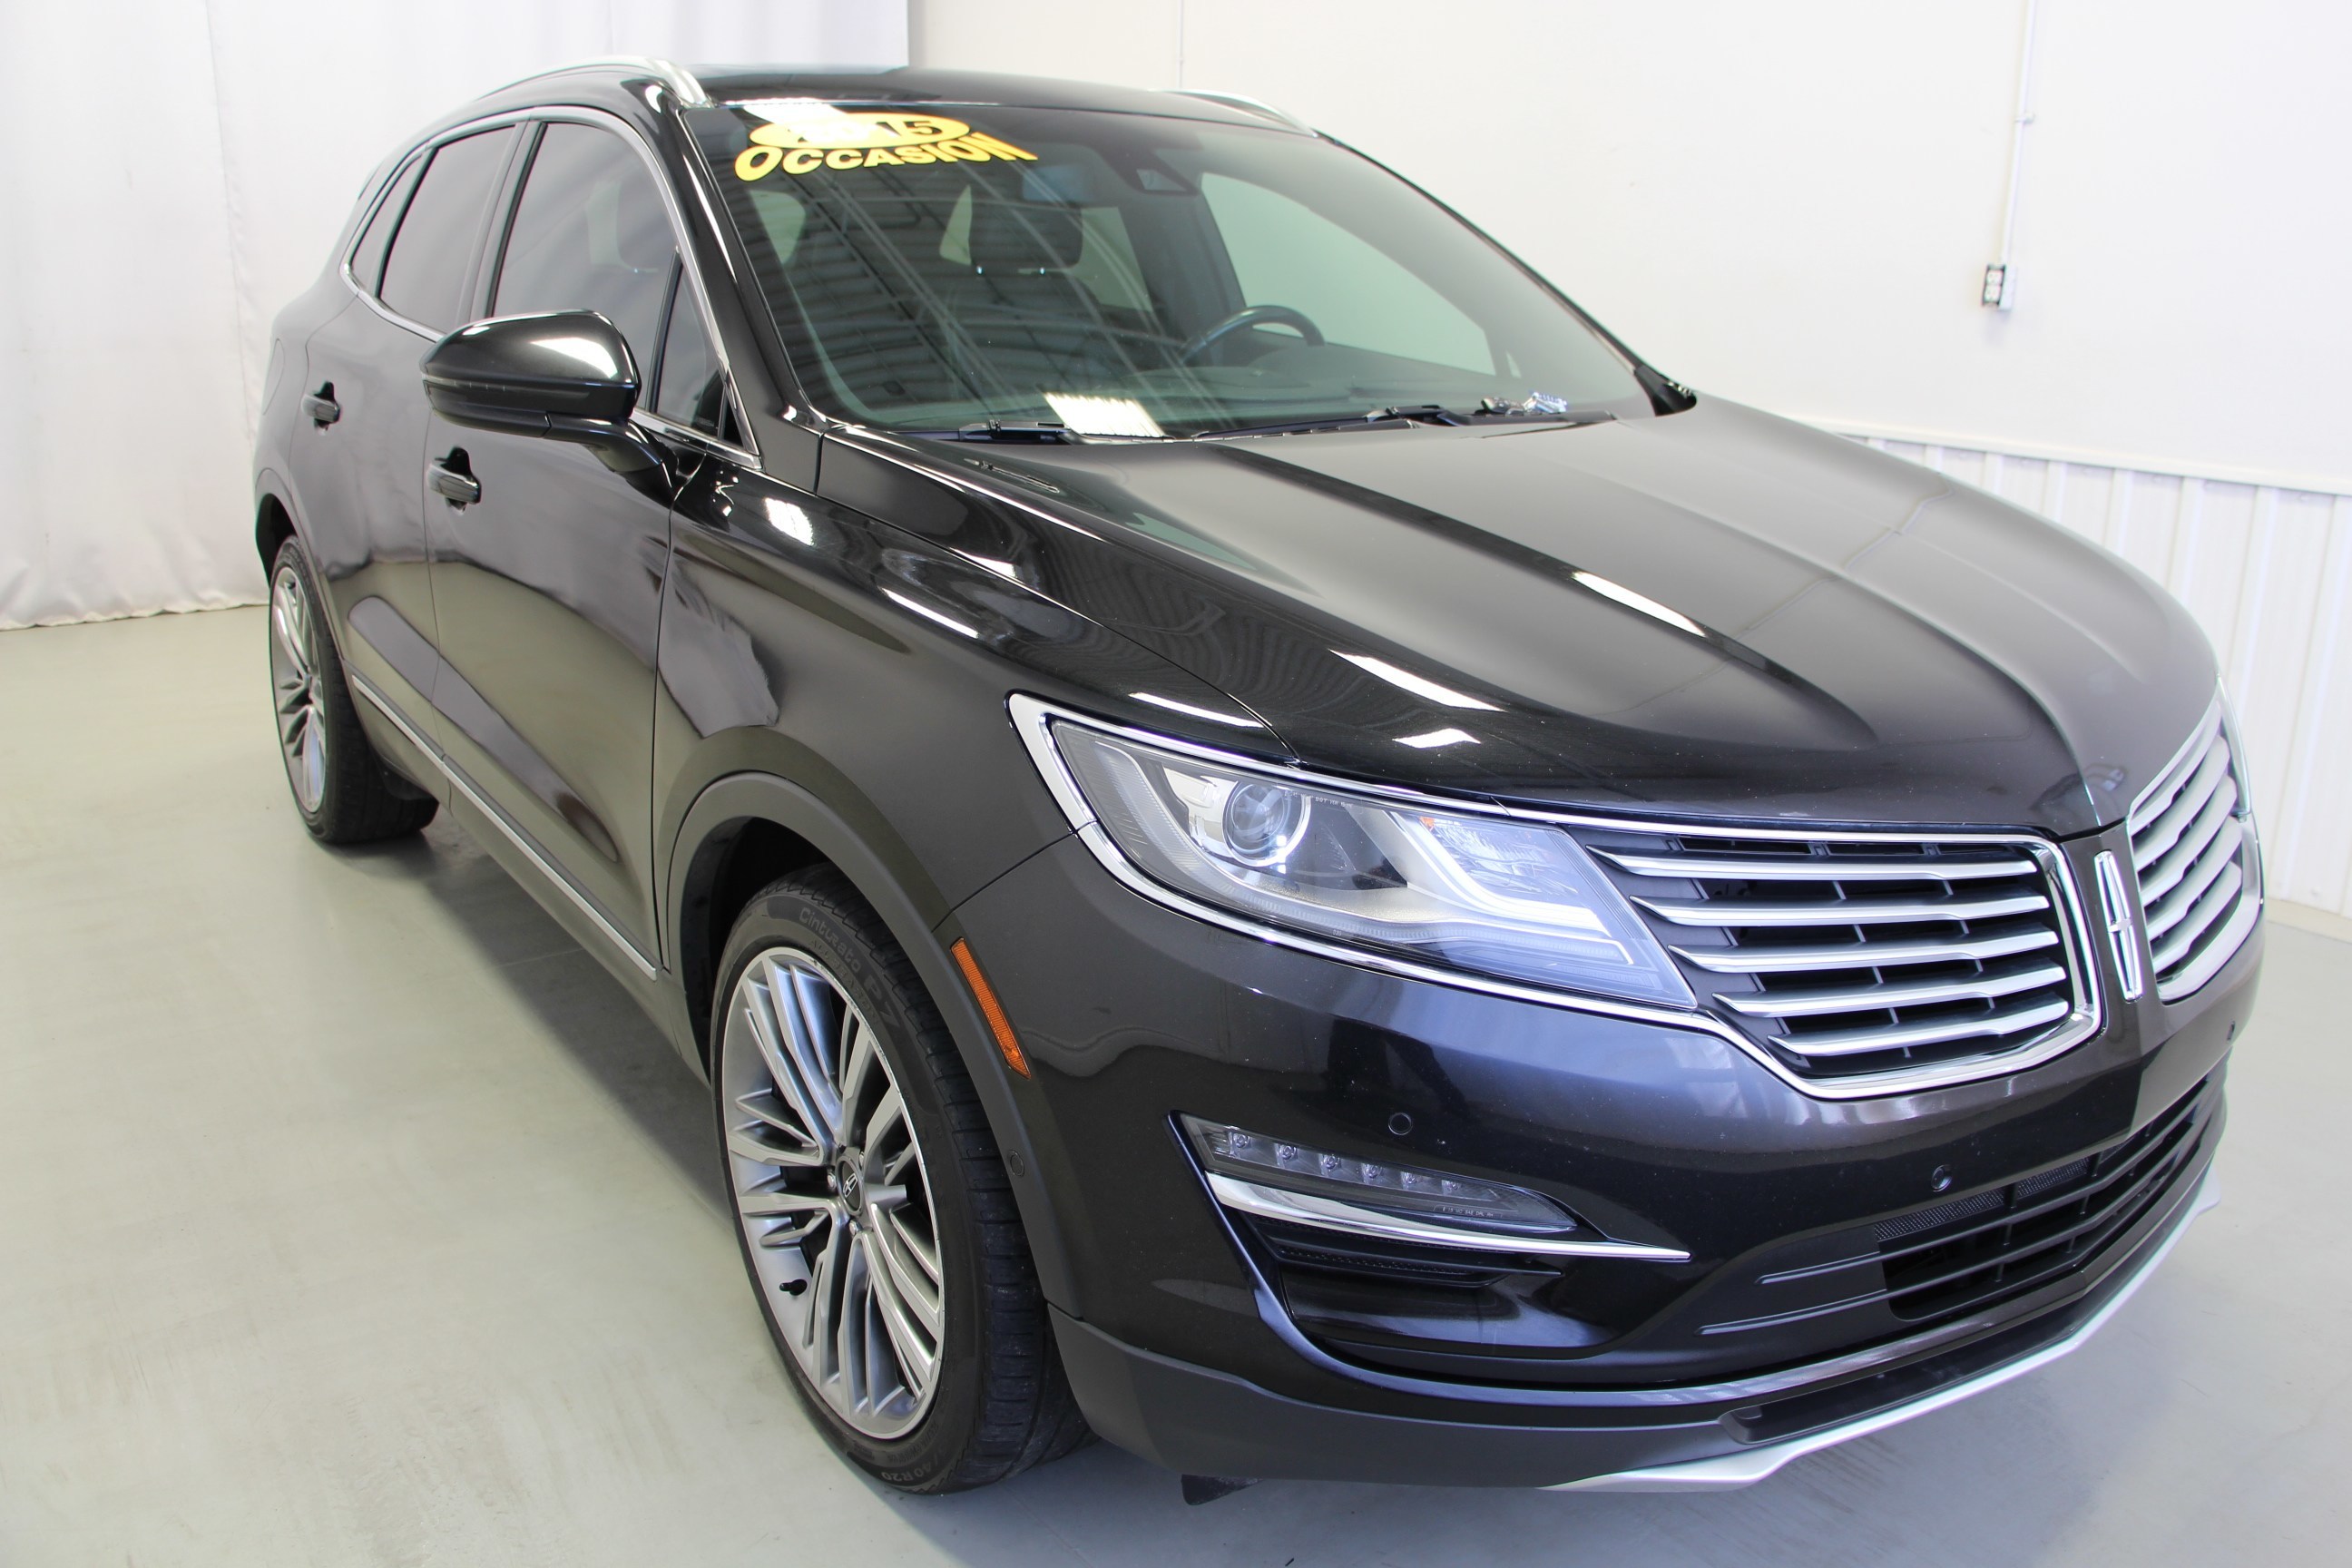  Lincoln MKC RESERVE AWD